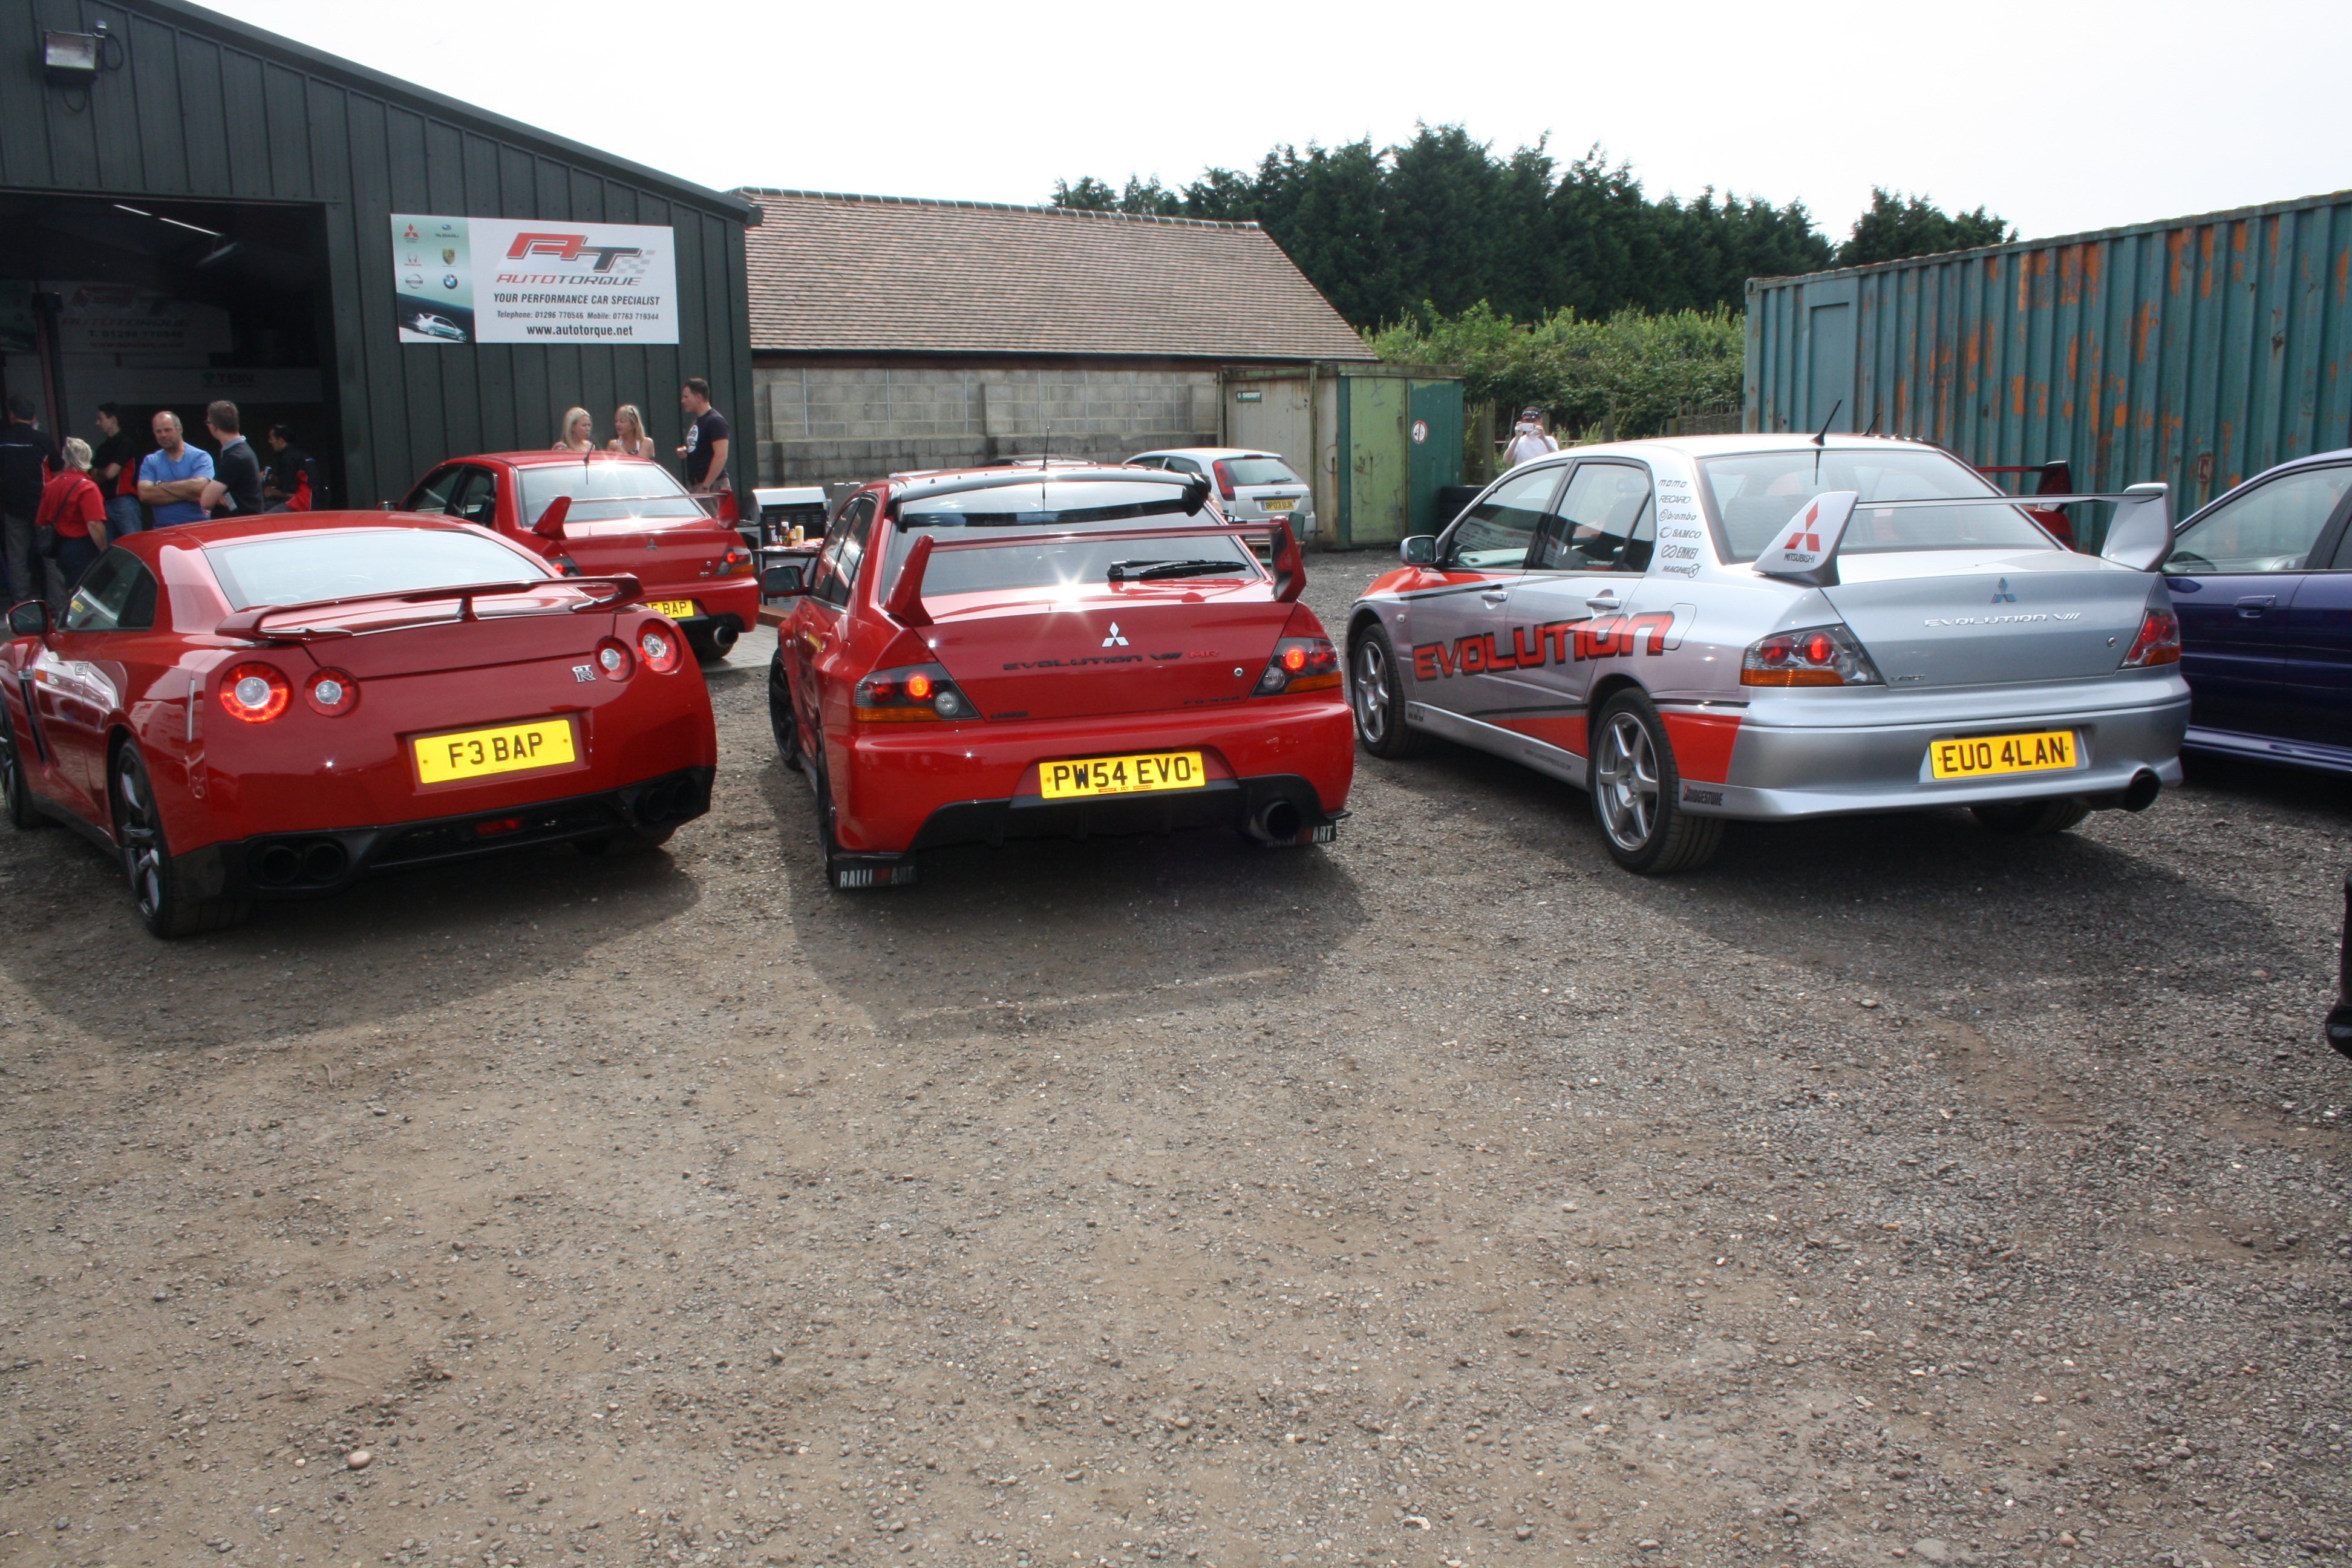 Auto Torque Open day and Performance car meet – 26th July